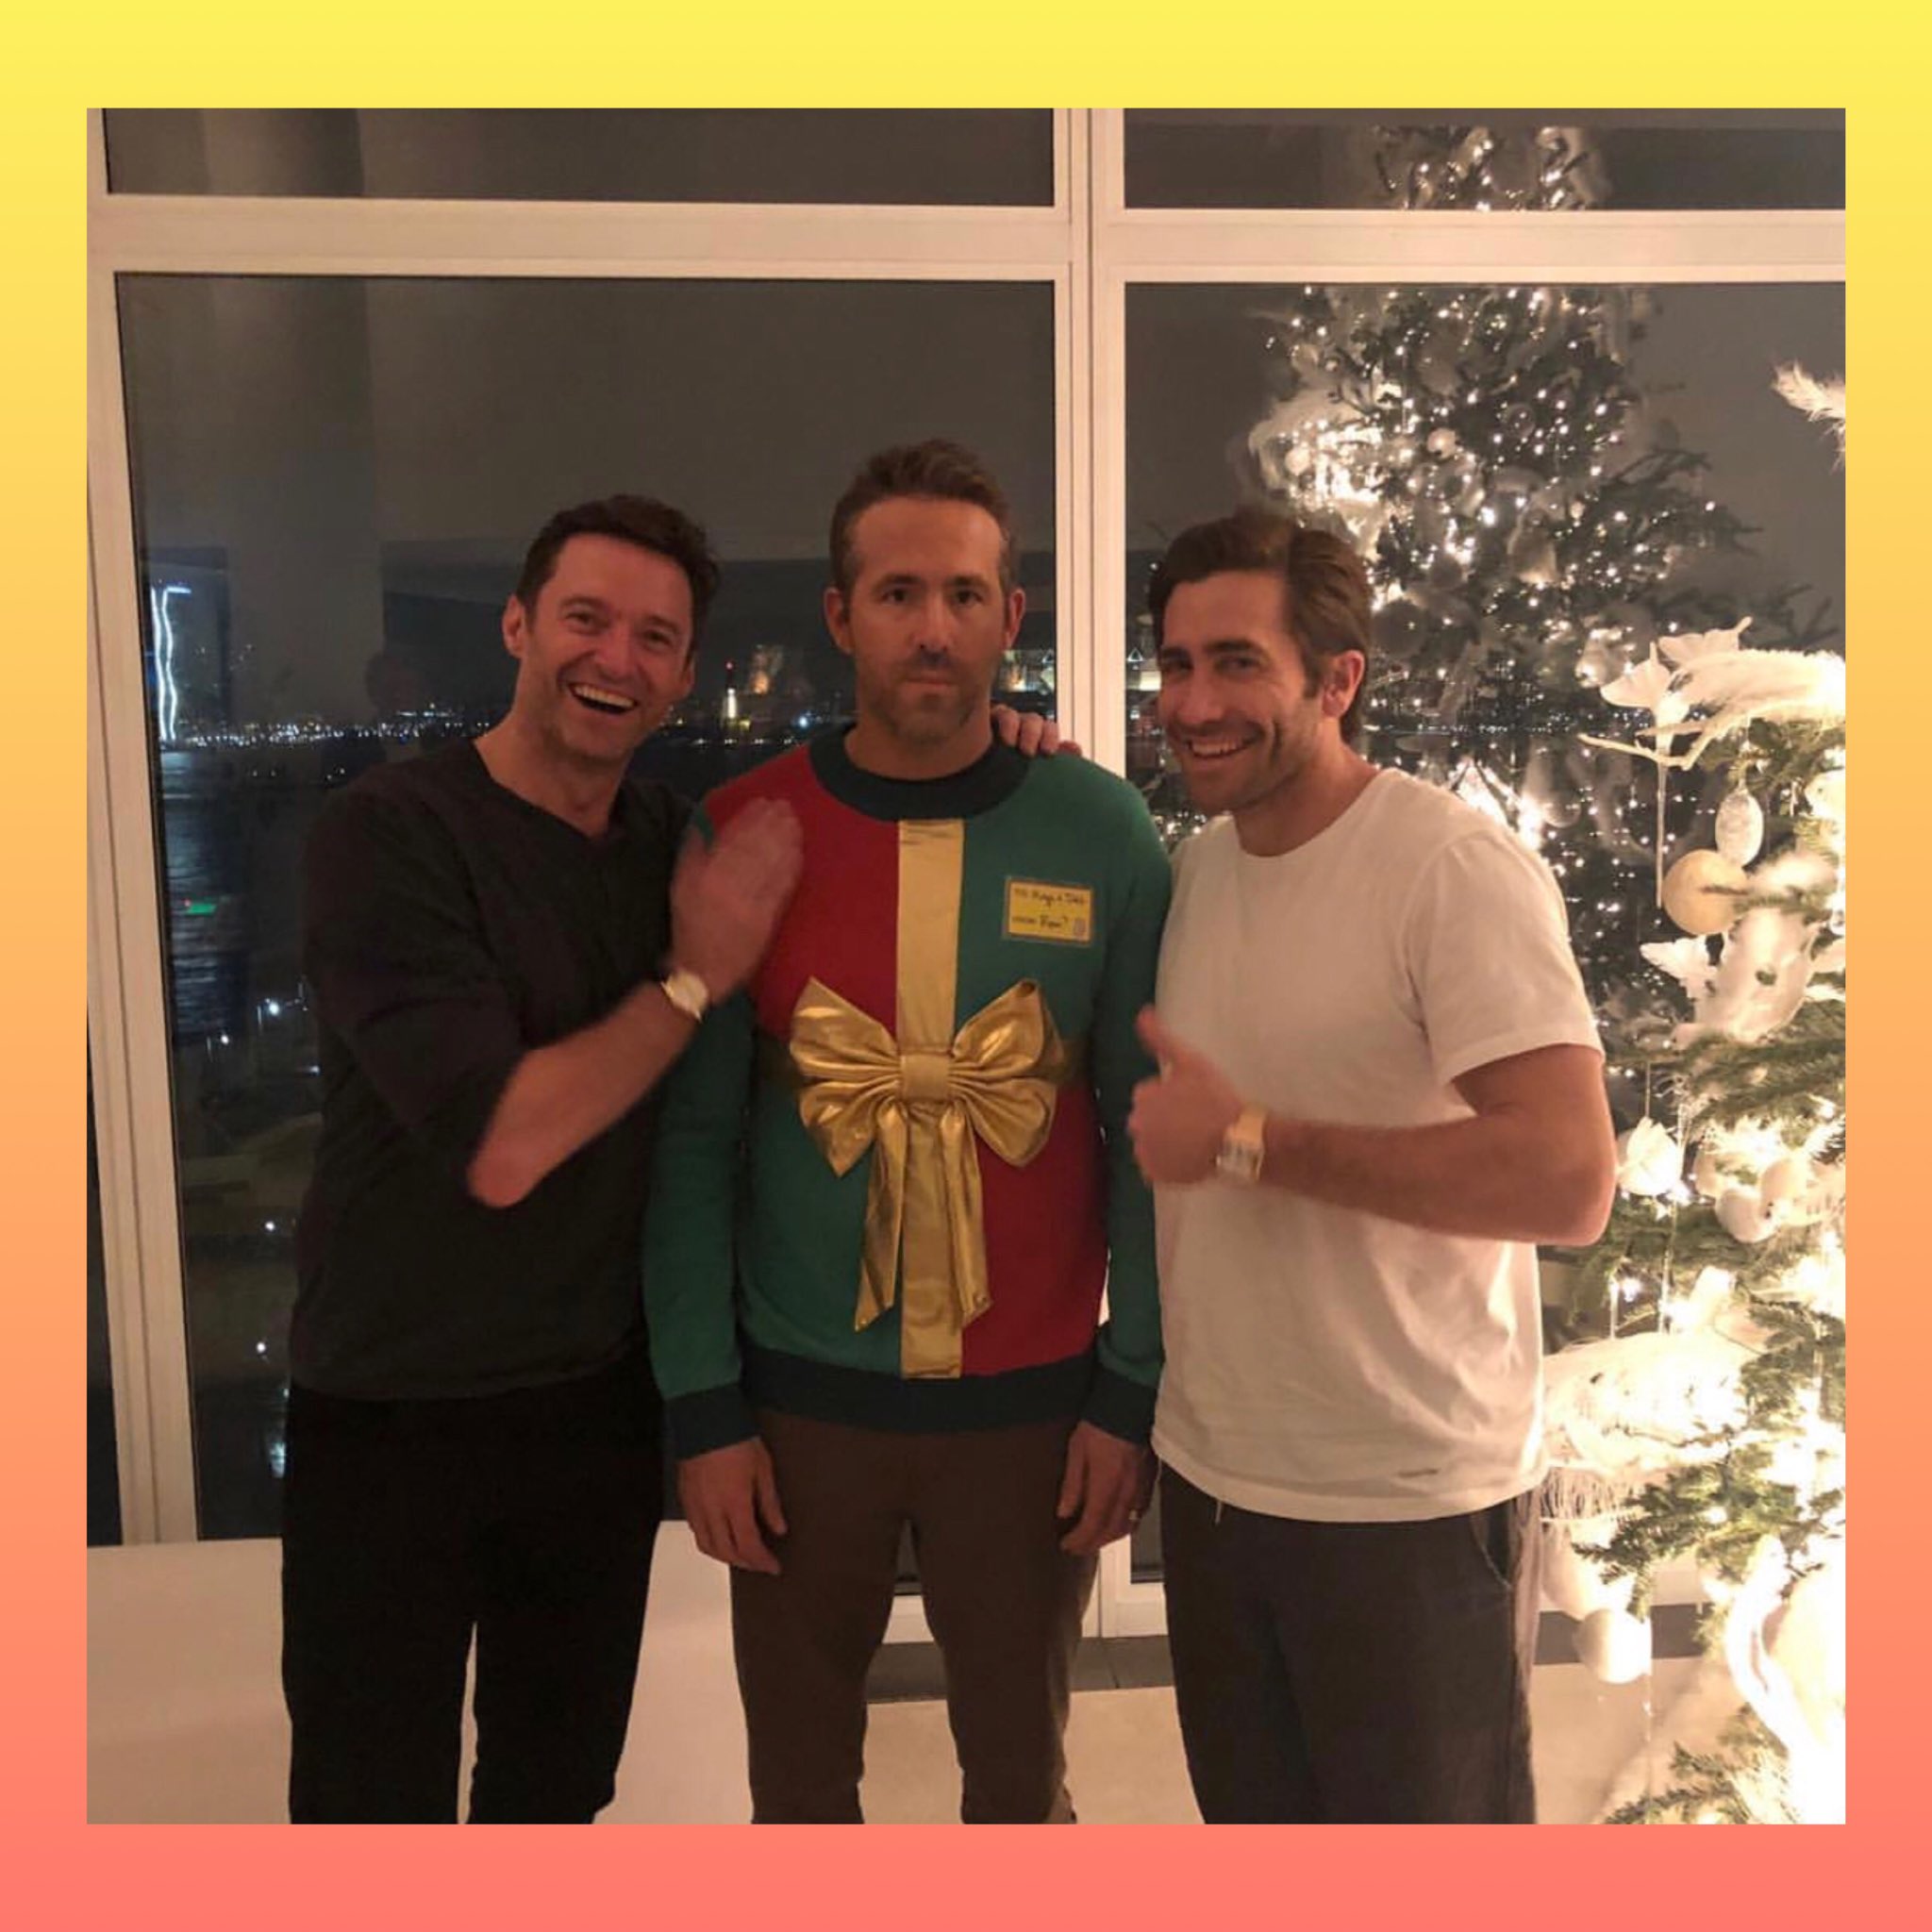 Pop Crave on Twitter: ".@RyanReynolds was tricked by Hugh Jackman &amp;  Jake Gyllenhaal into being the only person to show up to a holiday party  wearing an ugly Christmas sweater. 😂 https://t.co/IelnucjlOQ" /